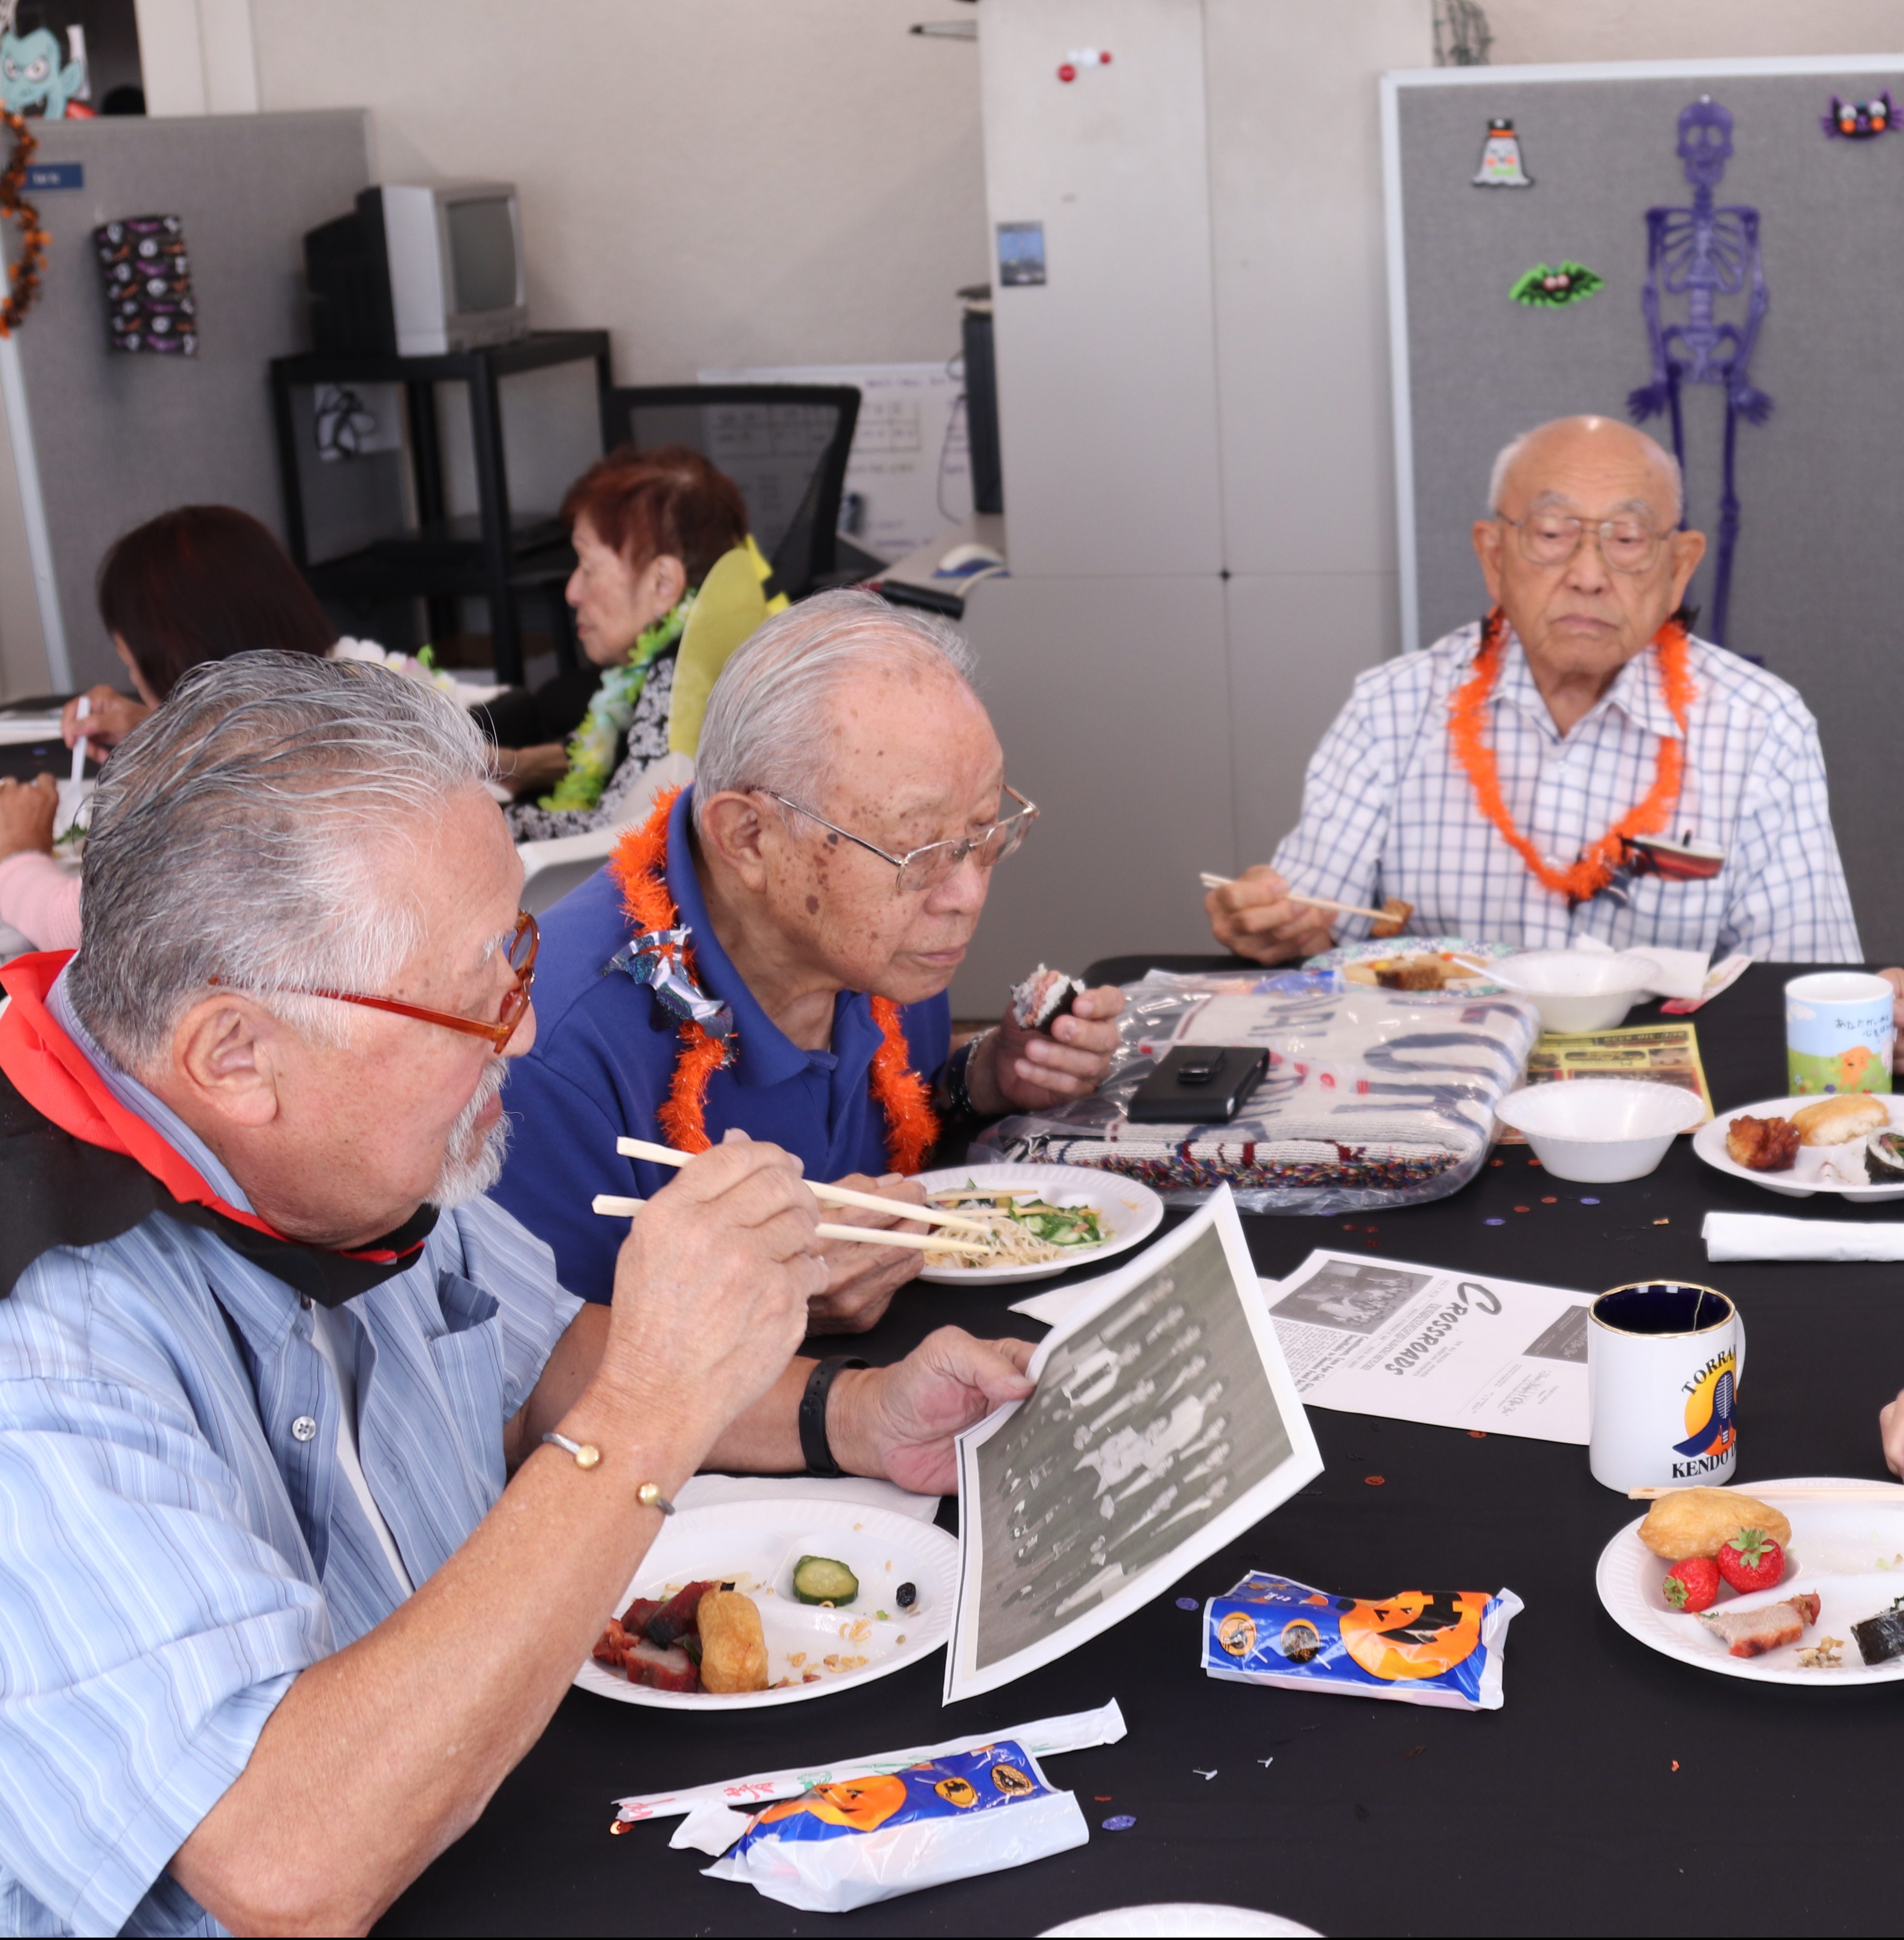 Older adults eating with chopsticks while reading